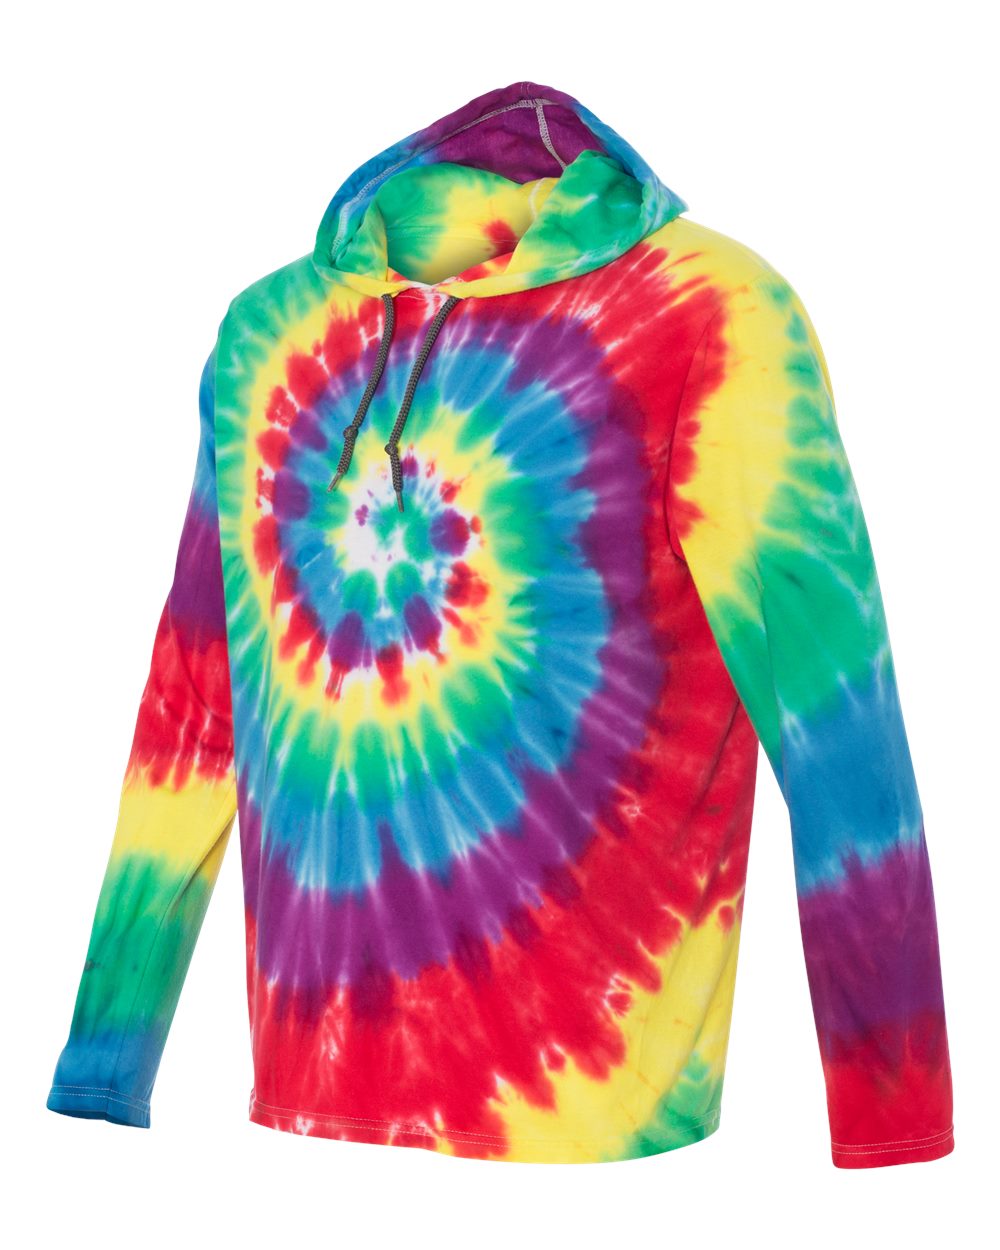 Dyenomite 430VR - Tie-Dyed Hooded Pullover T-Shirt $23.14 - Sweatshirts